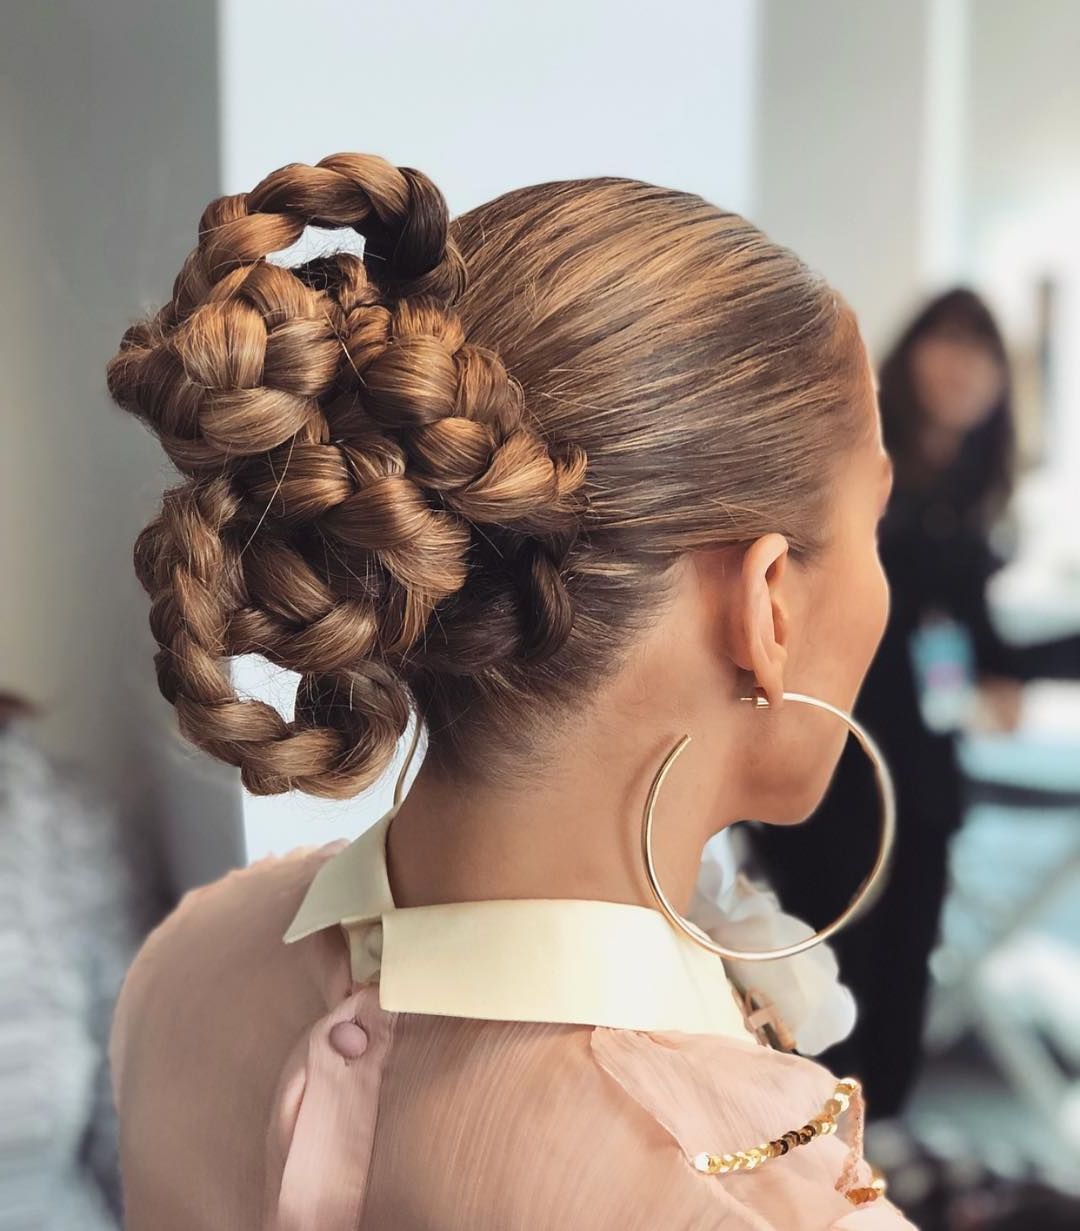 20 Braided Updo Hairstyles – Pictures Of Pretty Updos With Braids Pertaining To Braided Updo For Long Hair (Photo 22 of 25)